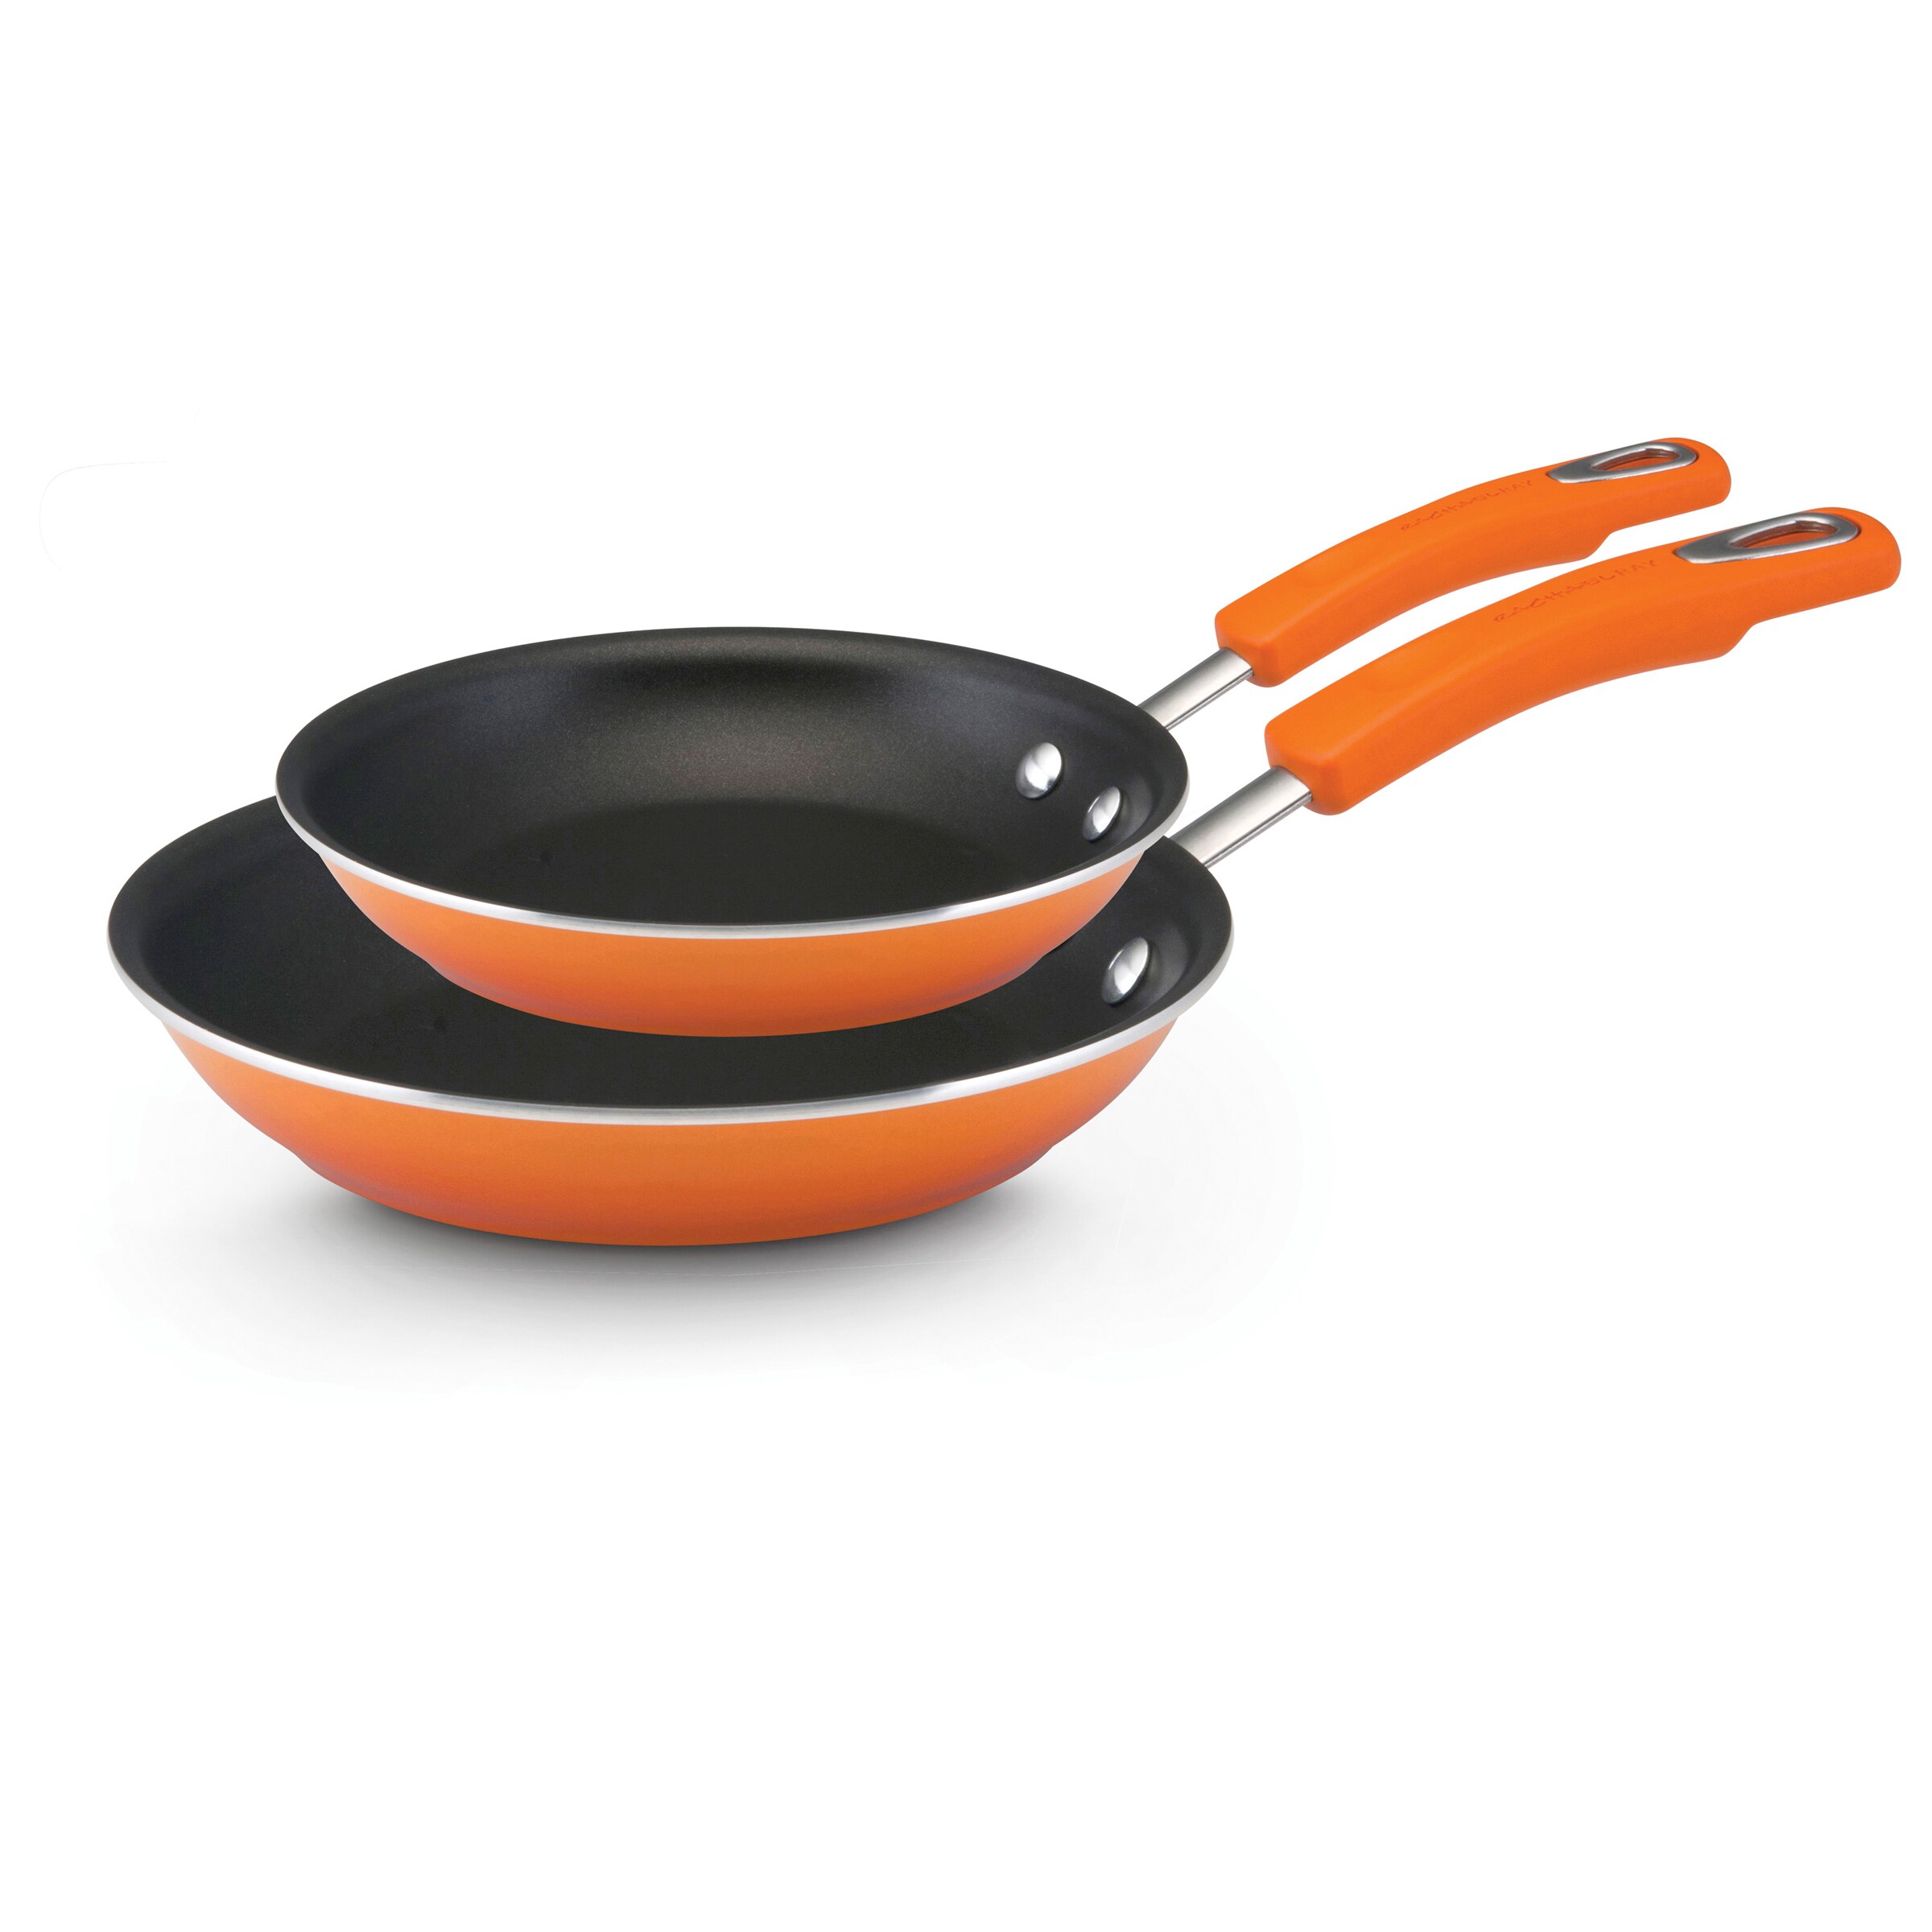 Rachael Ray Orange Hard Enamel 8.25 inch and 11 inch Twin Pack Skillet